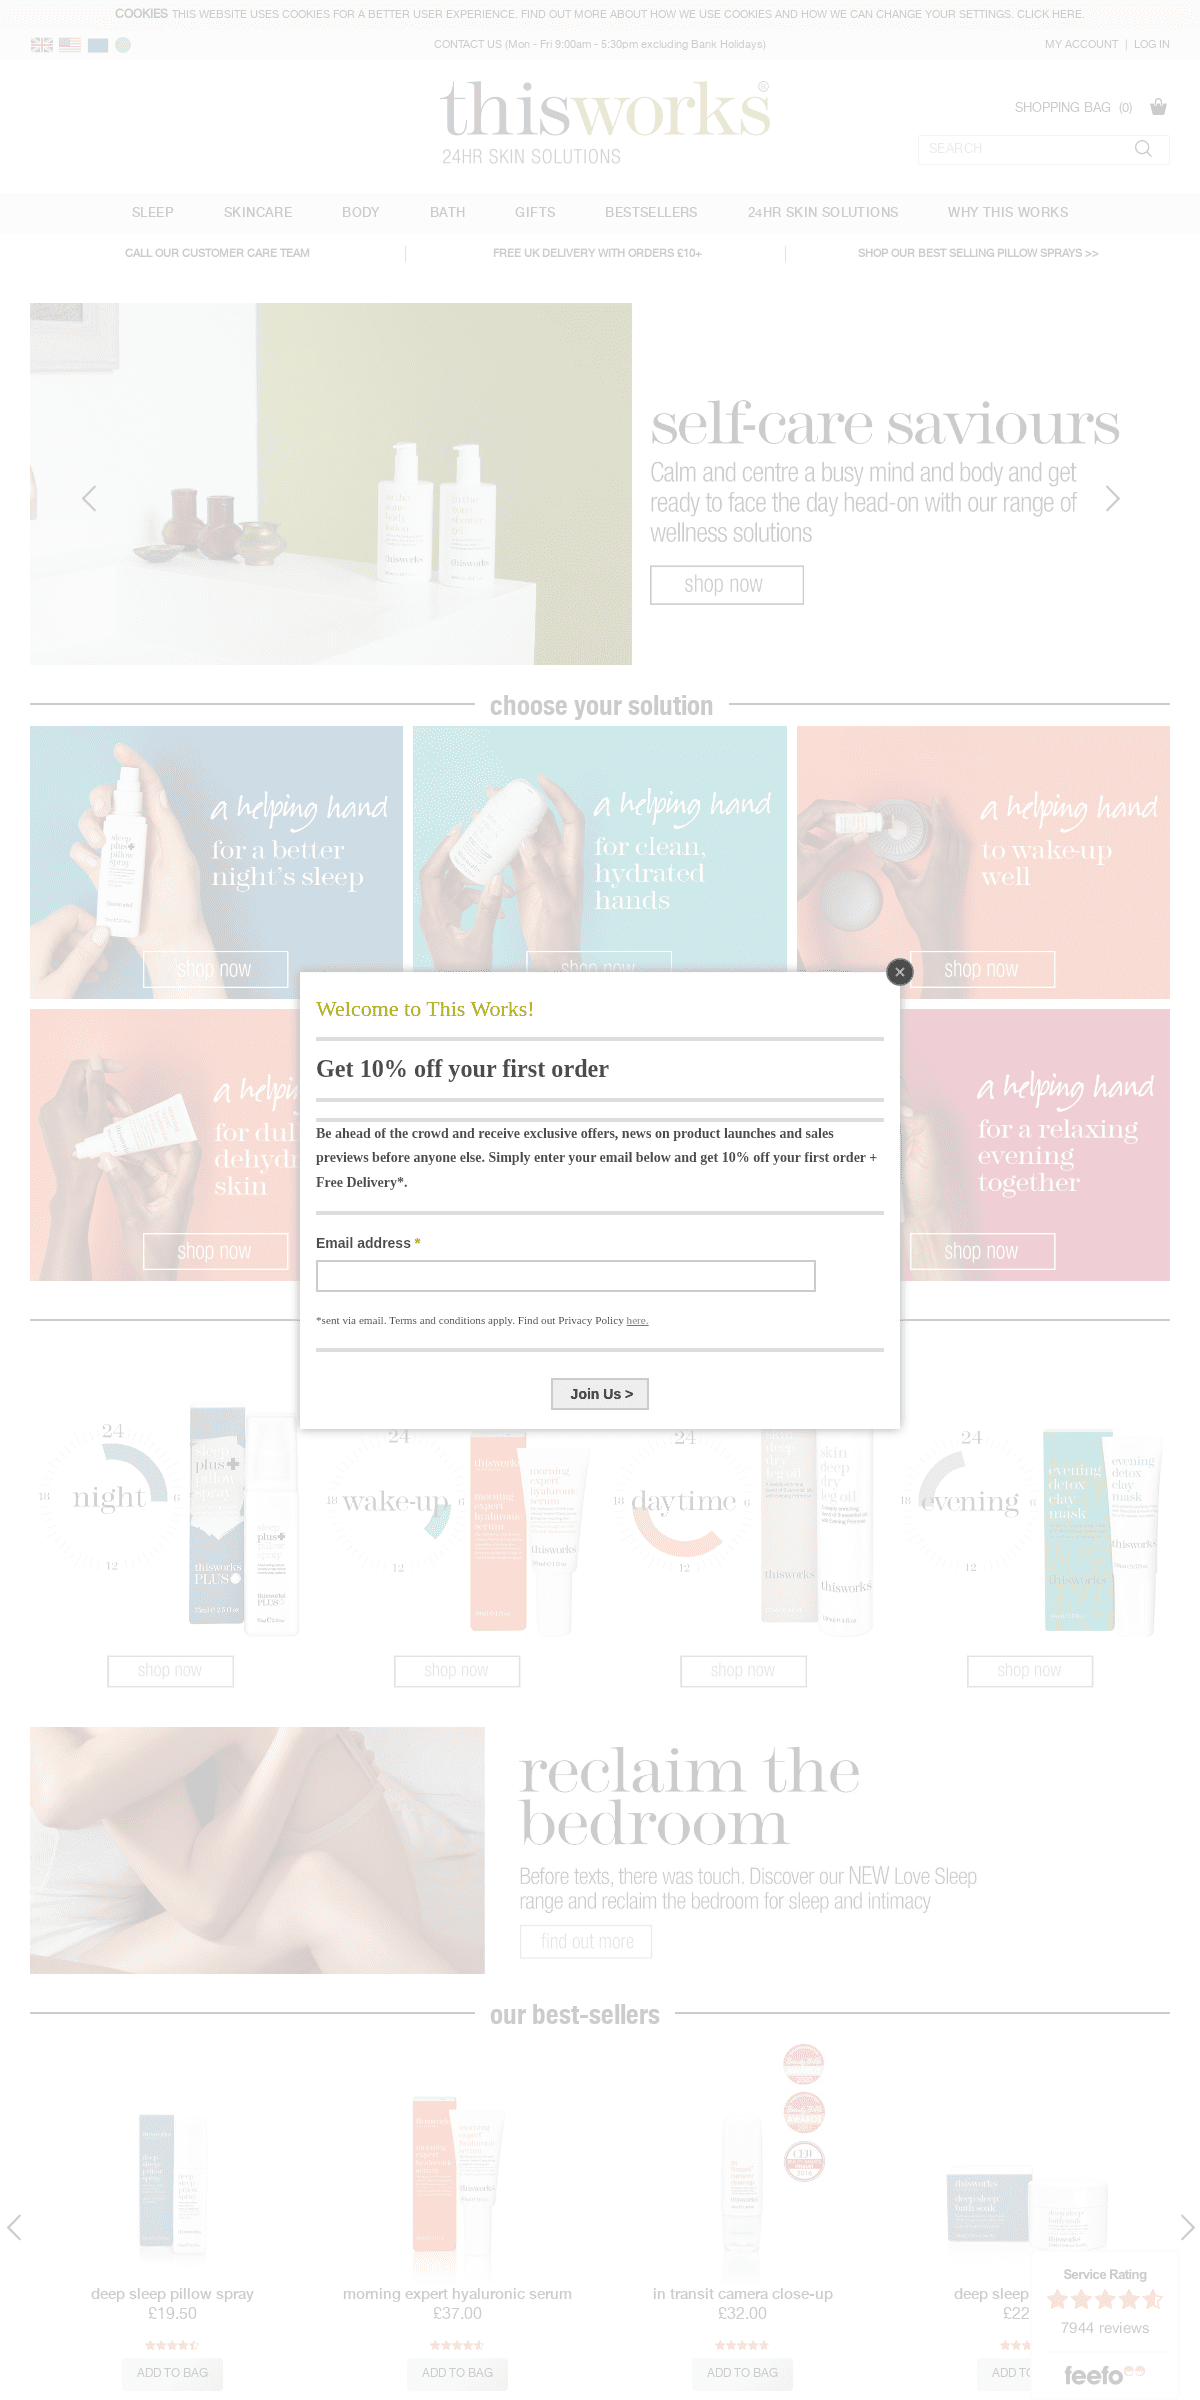 A complete backup of thisworks.com